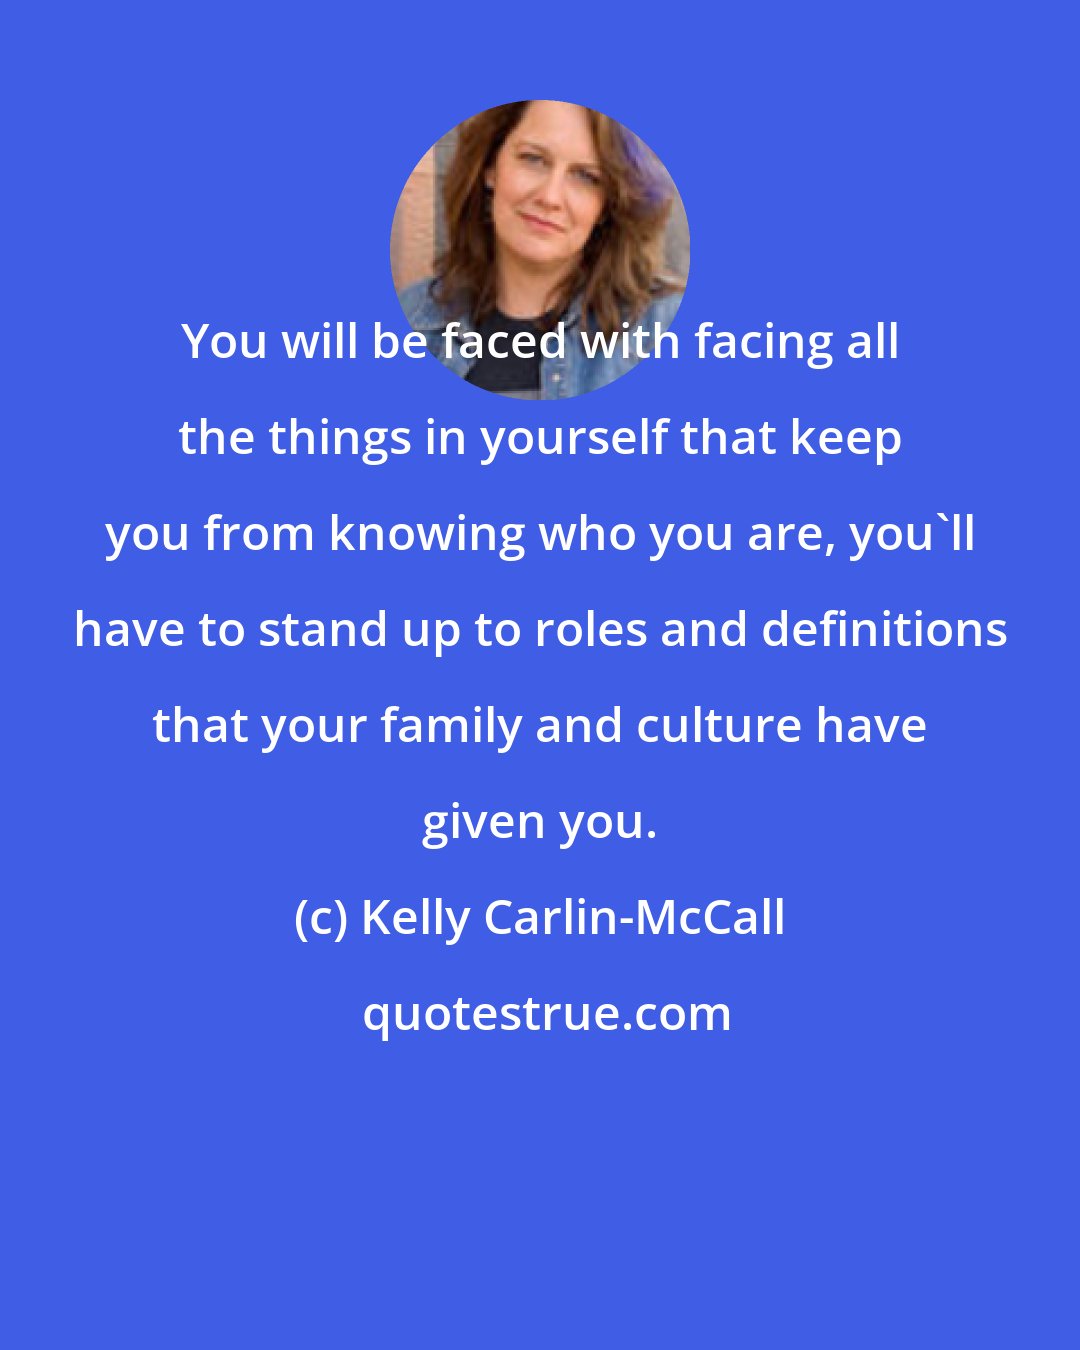 Kelly Carlin-McCall: You will be faced with facing all the things in yourself that keep you from knowing who you are, you'll have to stand up to roles and definitions that your family and culture have given you.